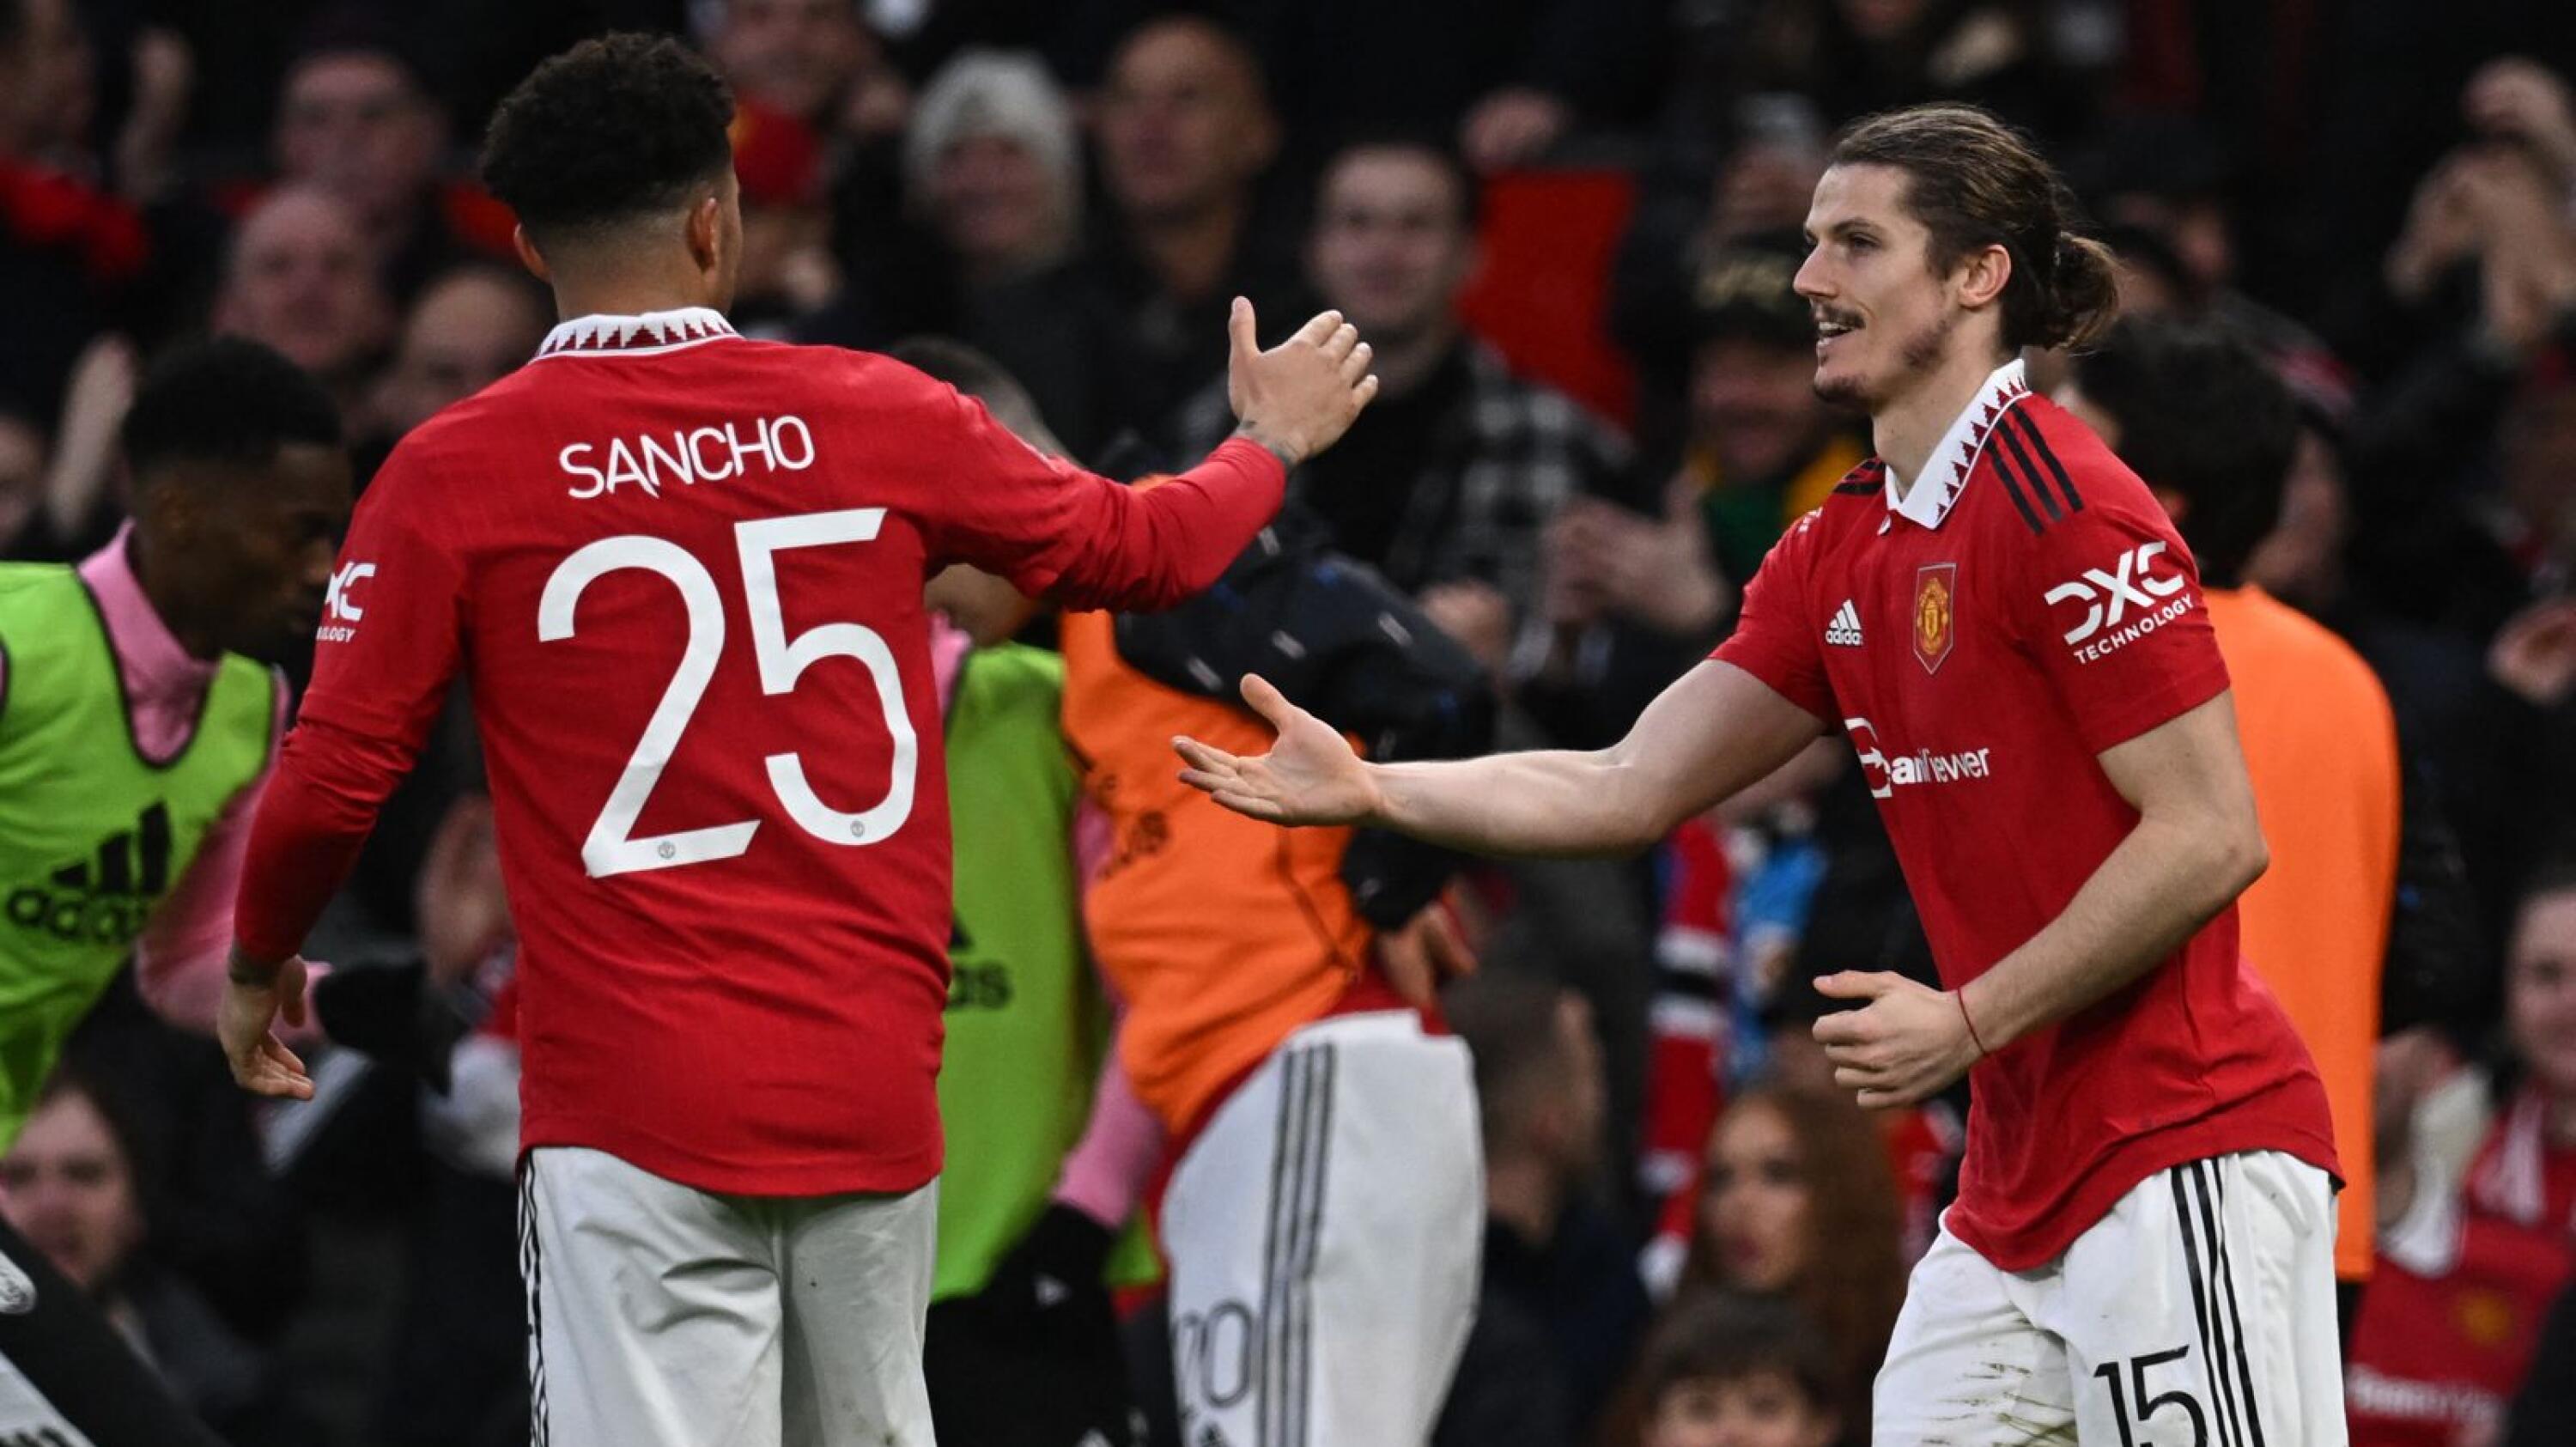 Manchester United's Marcel Sabitzer celebrates with Jadon Sancho after scoring their second goal during their FA Cup quarter-final against Fulham at Old Trafford in Manchester on Sunday